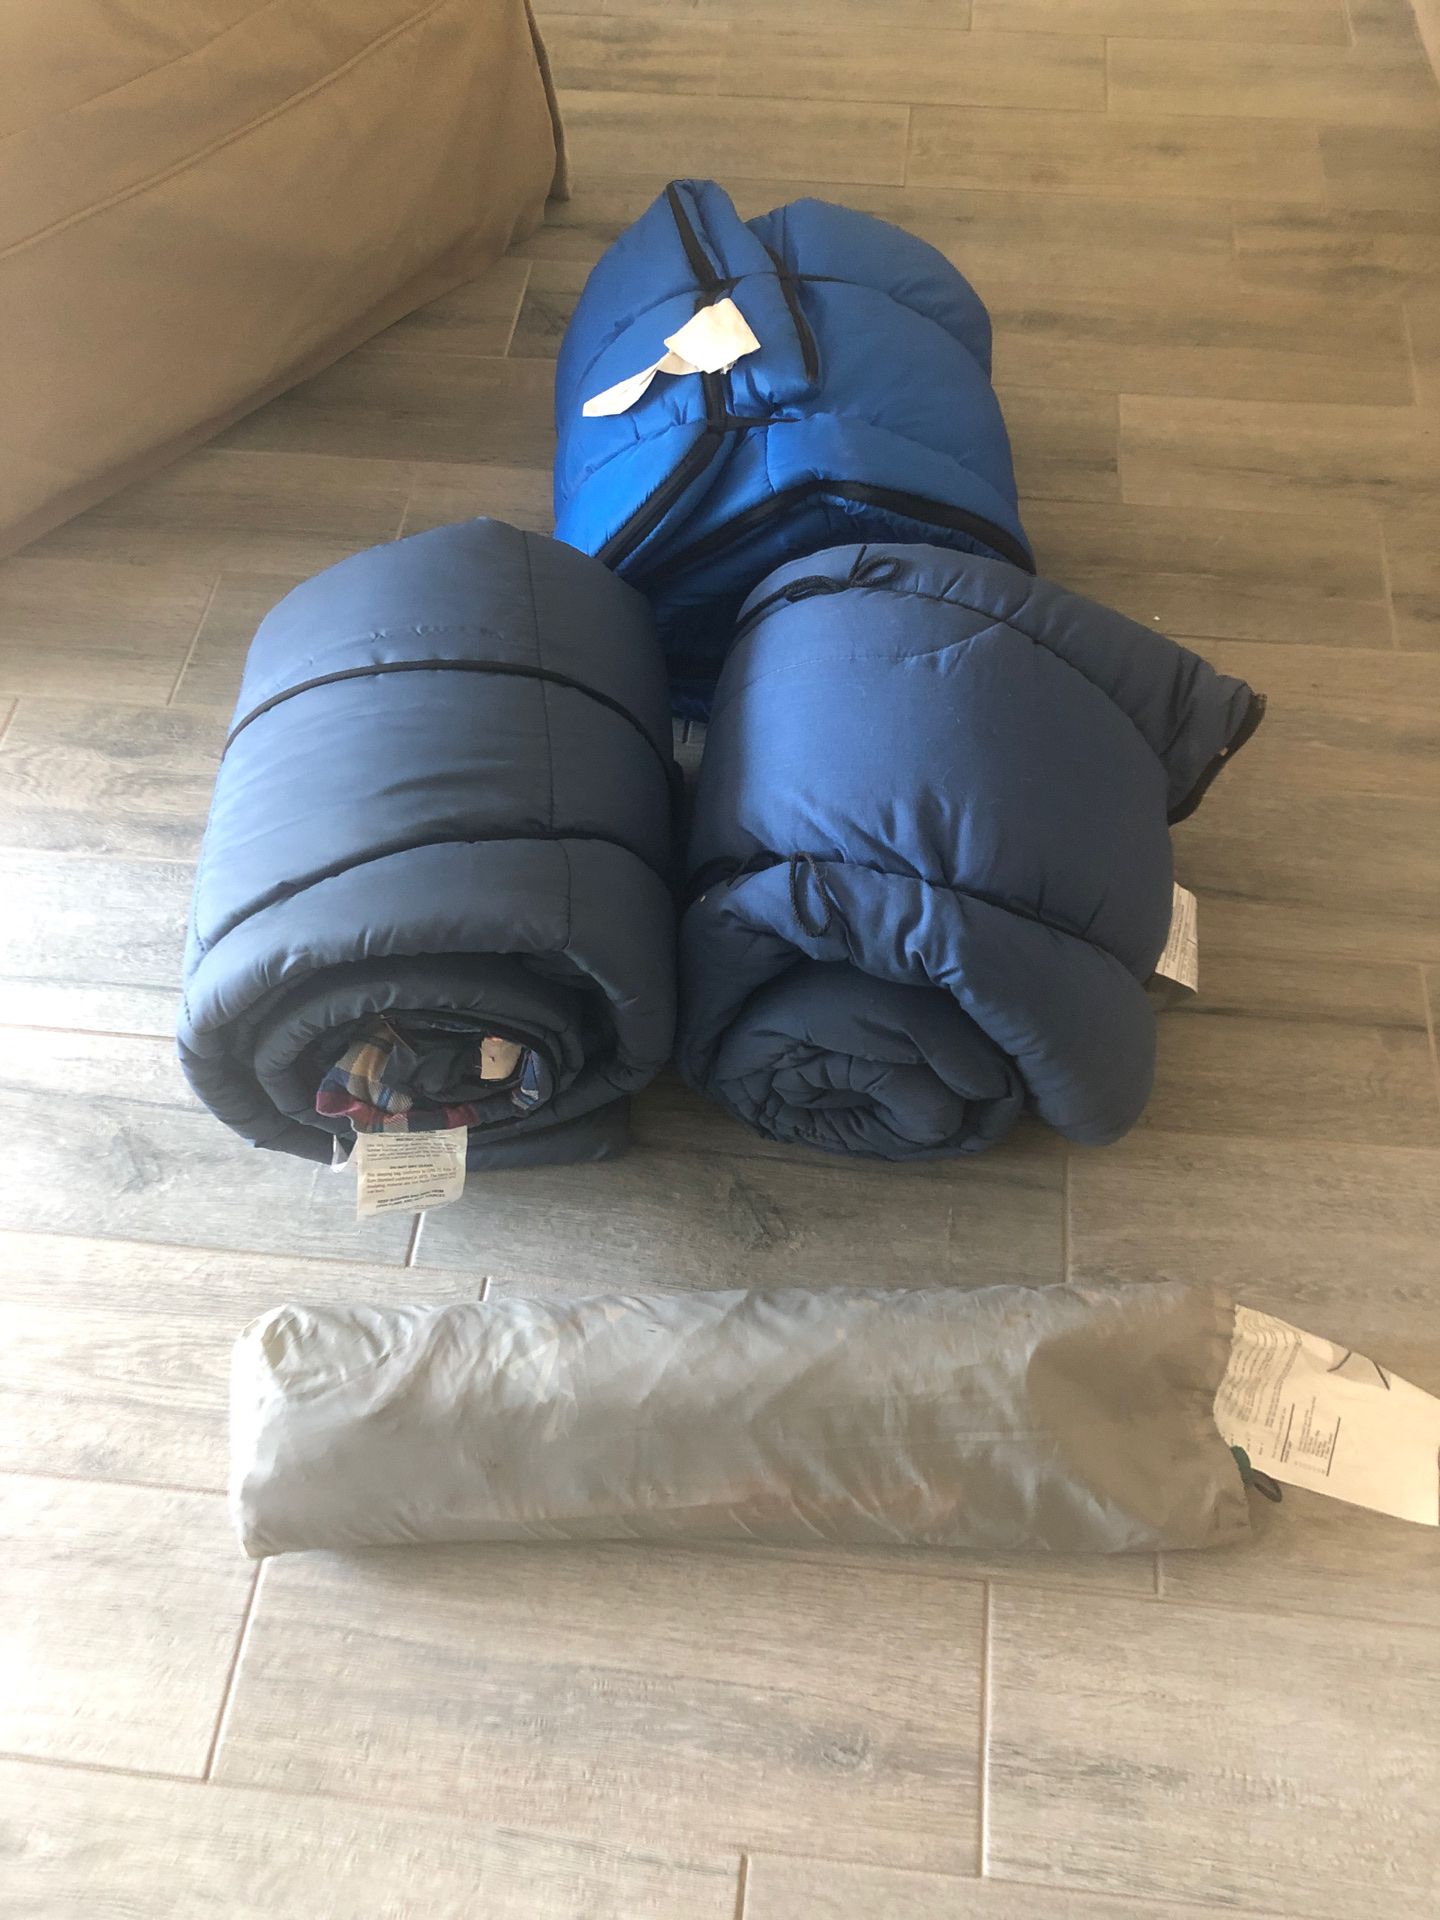 Tent and sleeping bags